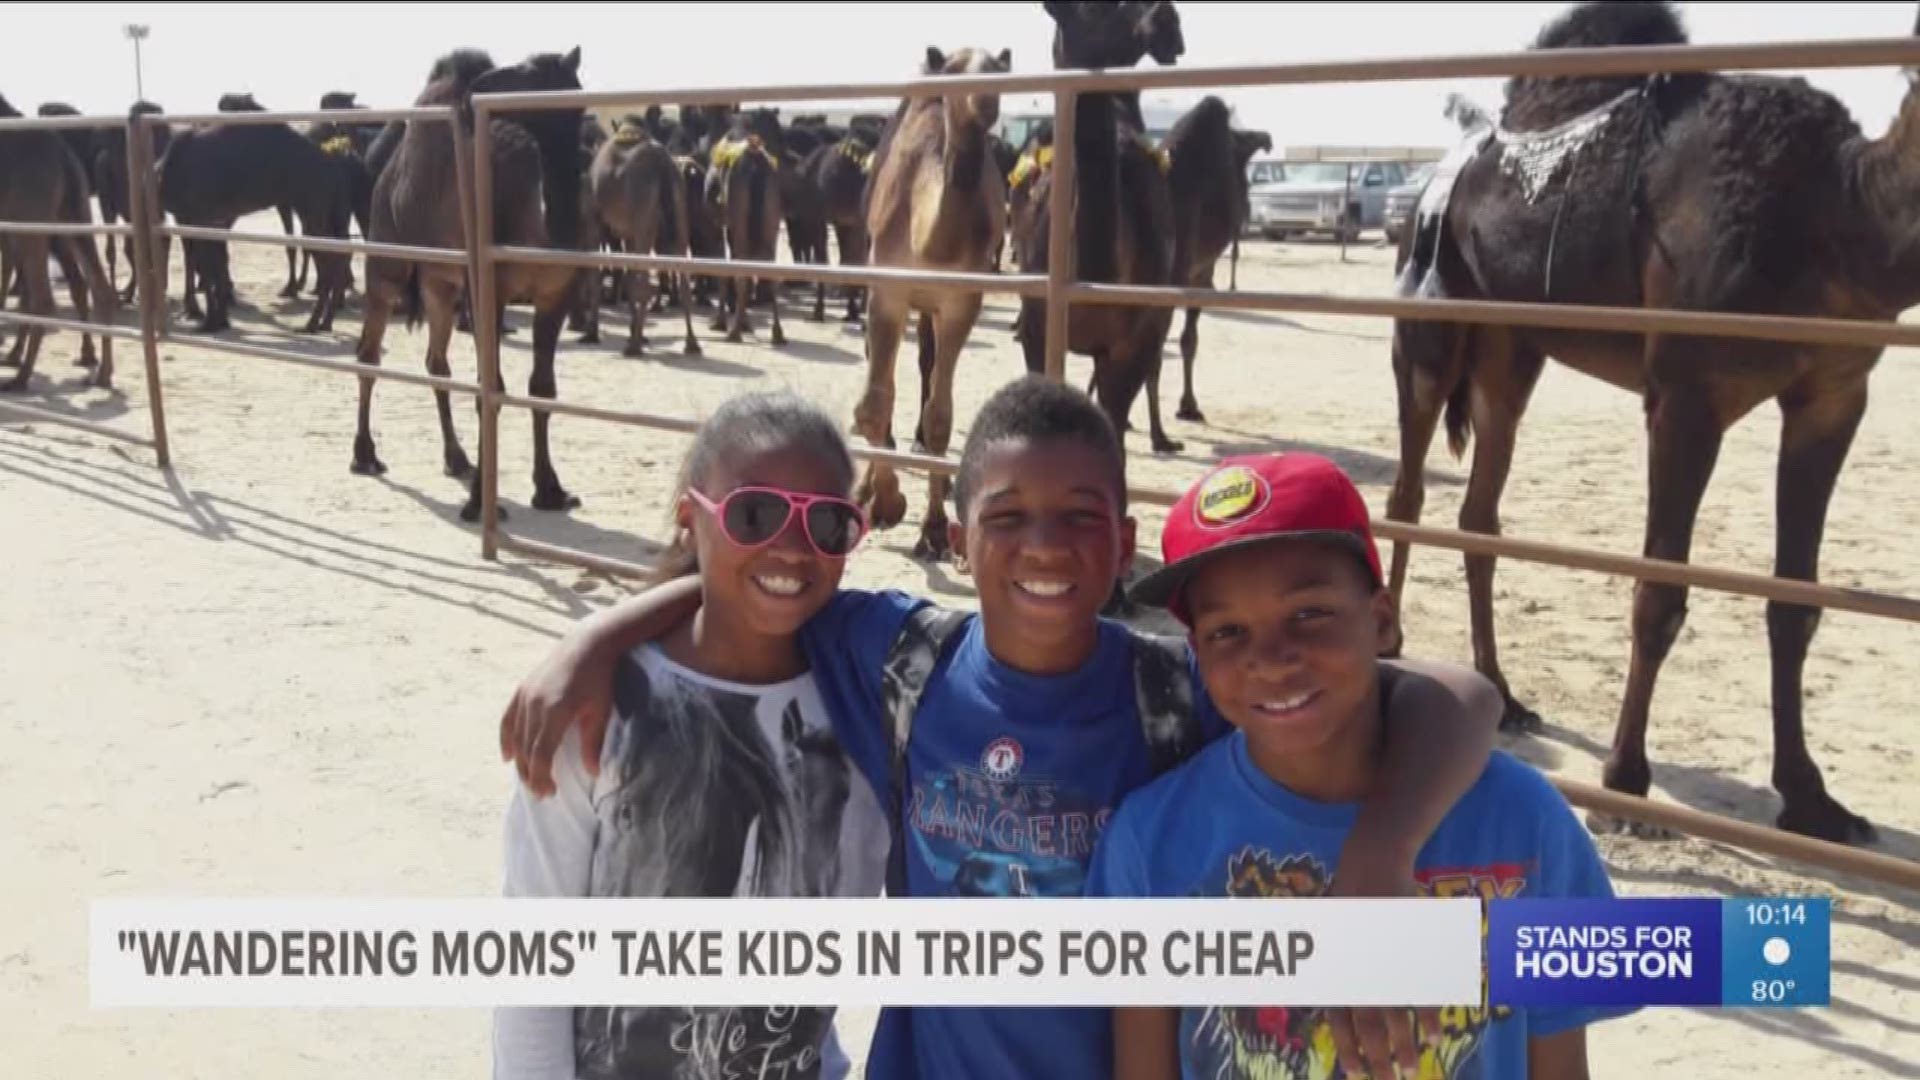 Want to land summer's hottest travel deals?  "Wandering Moms" want to help.